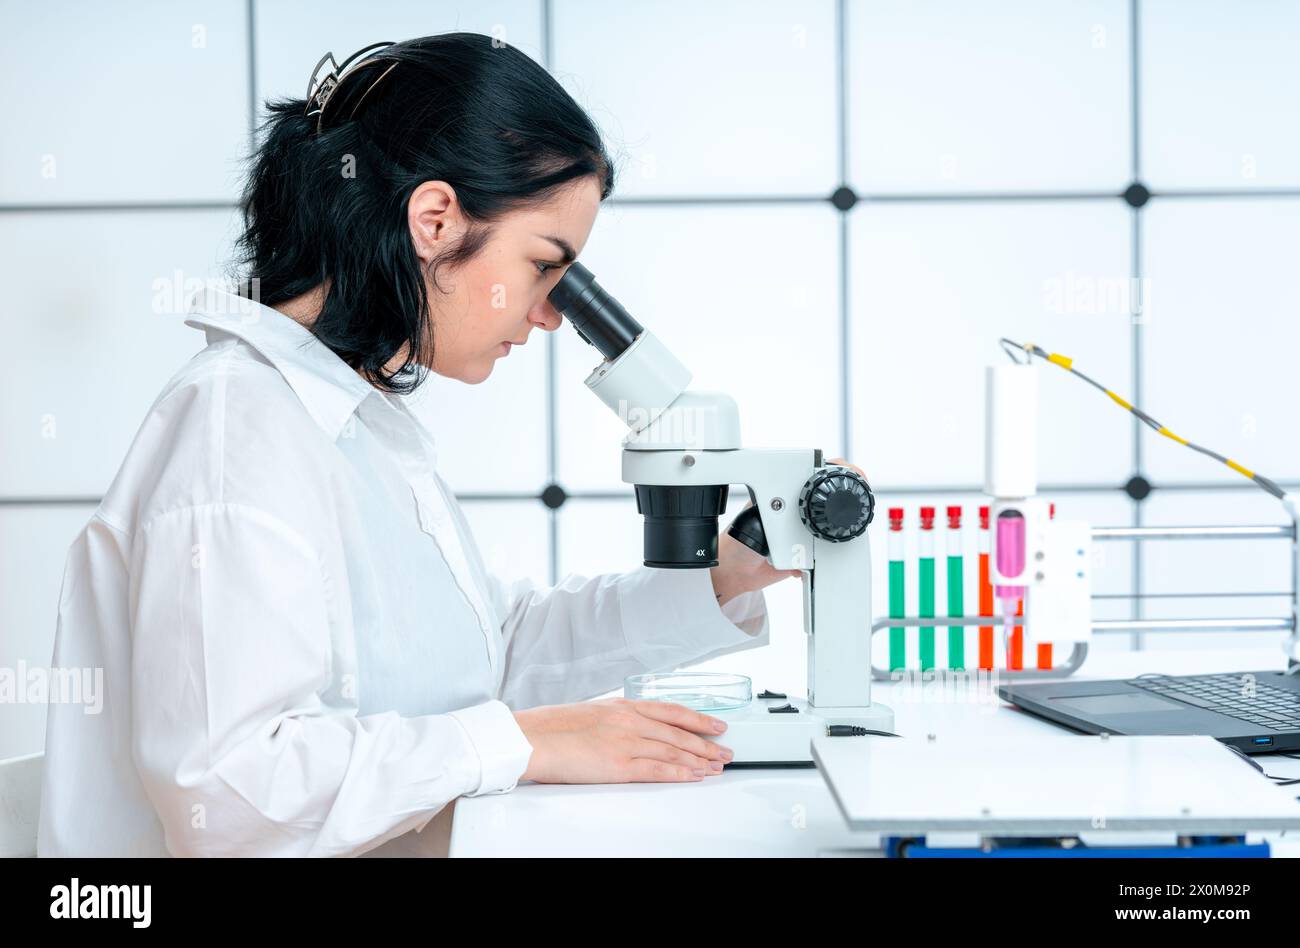 Scientist looking through a microscope. Stock Photo